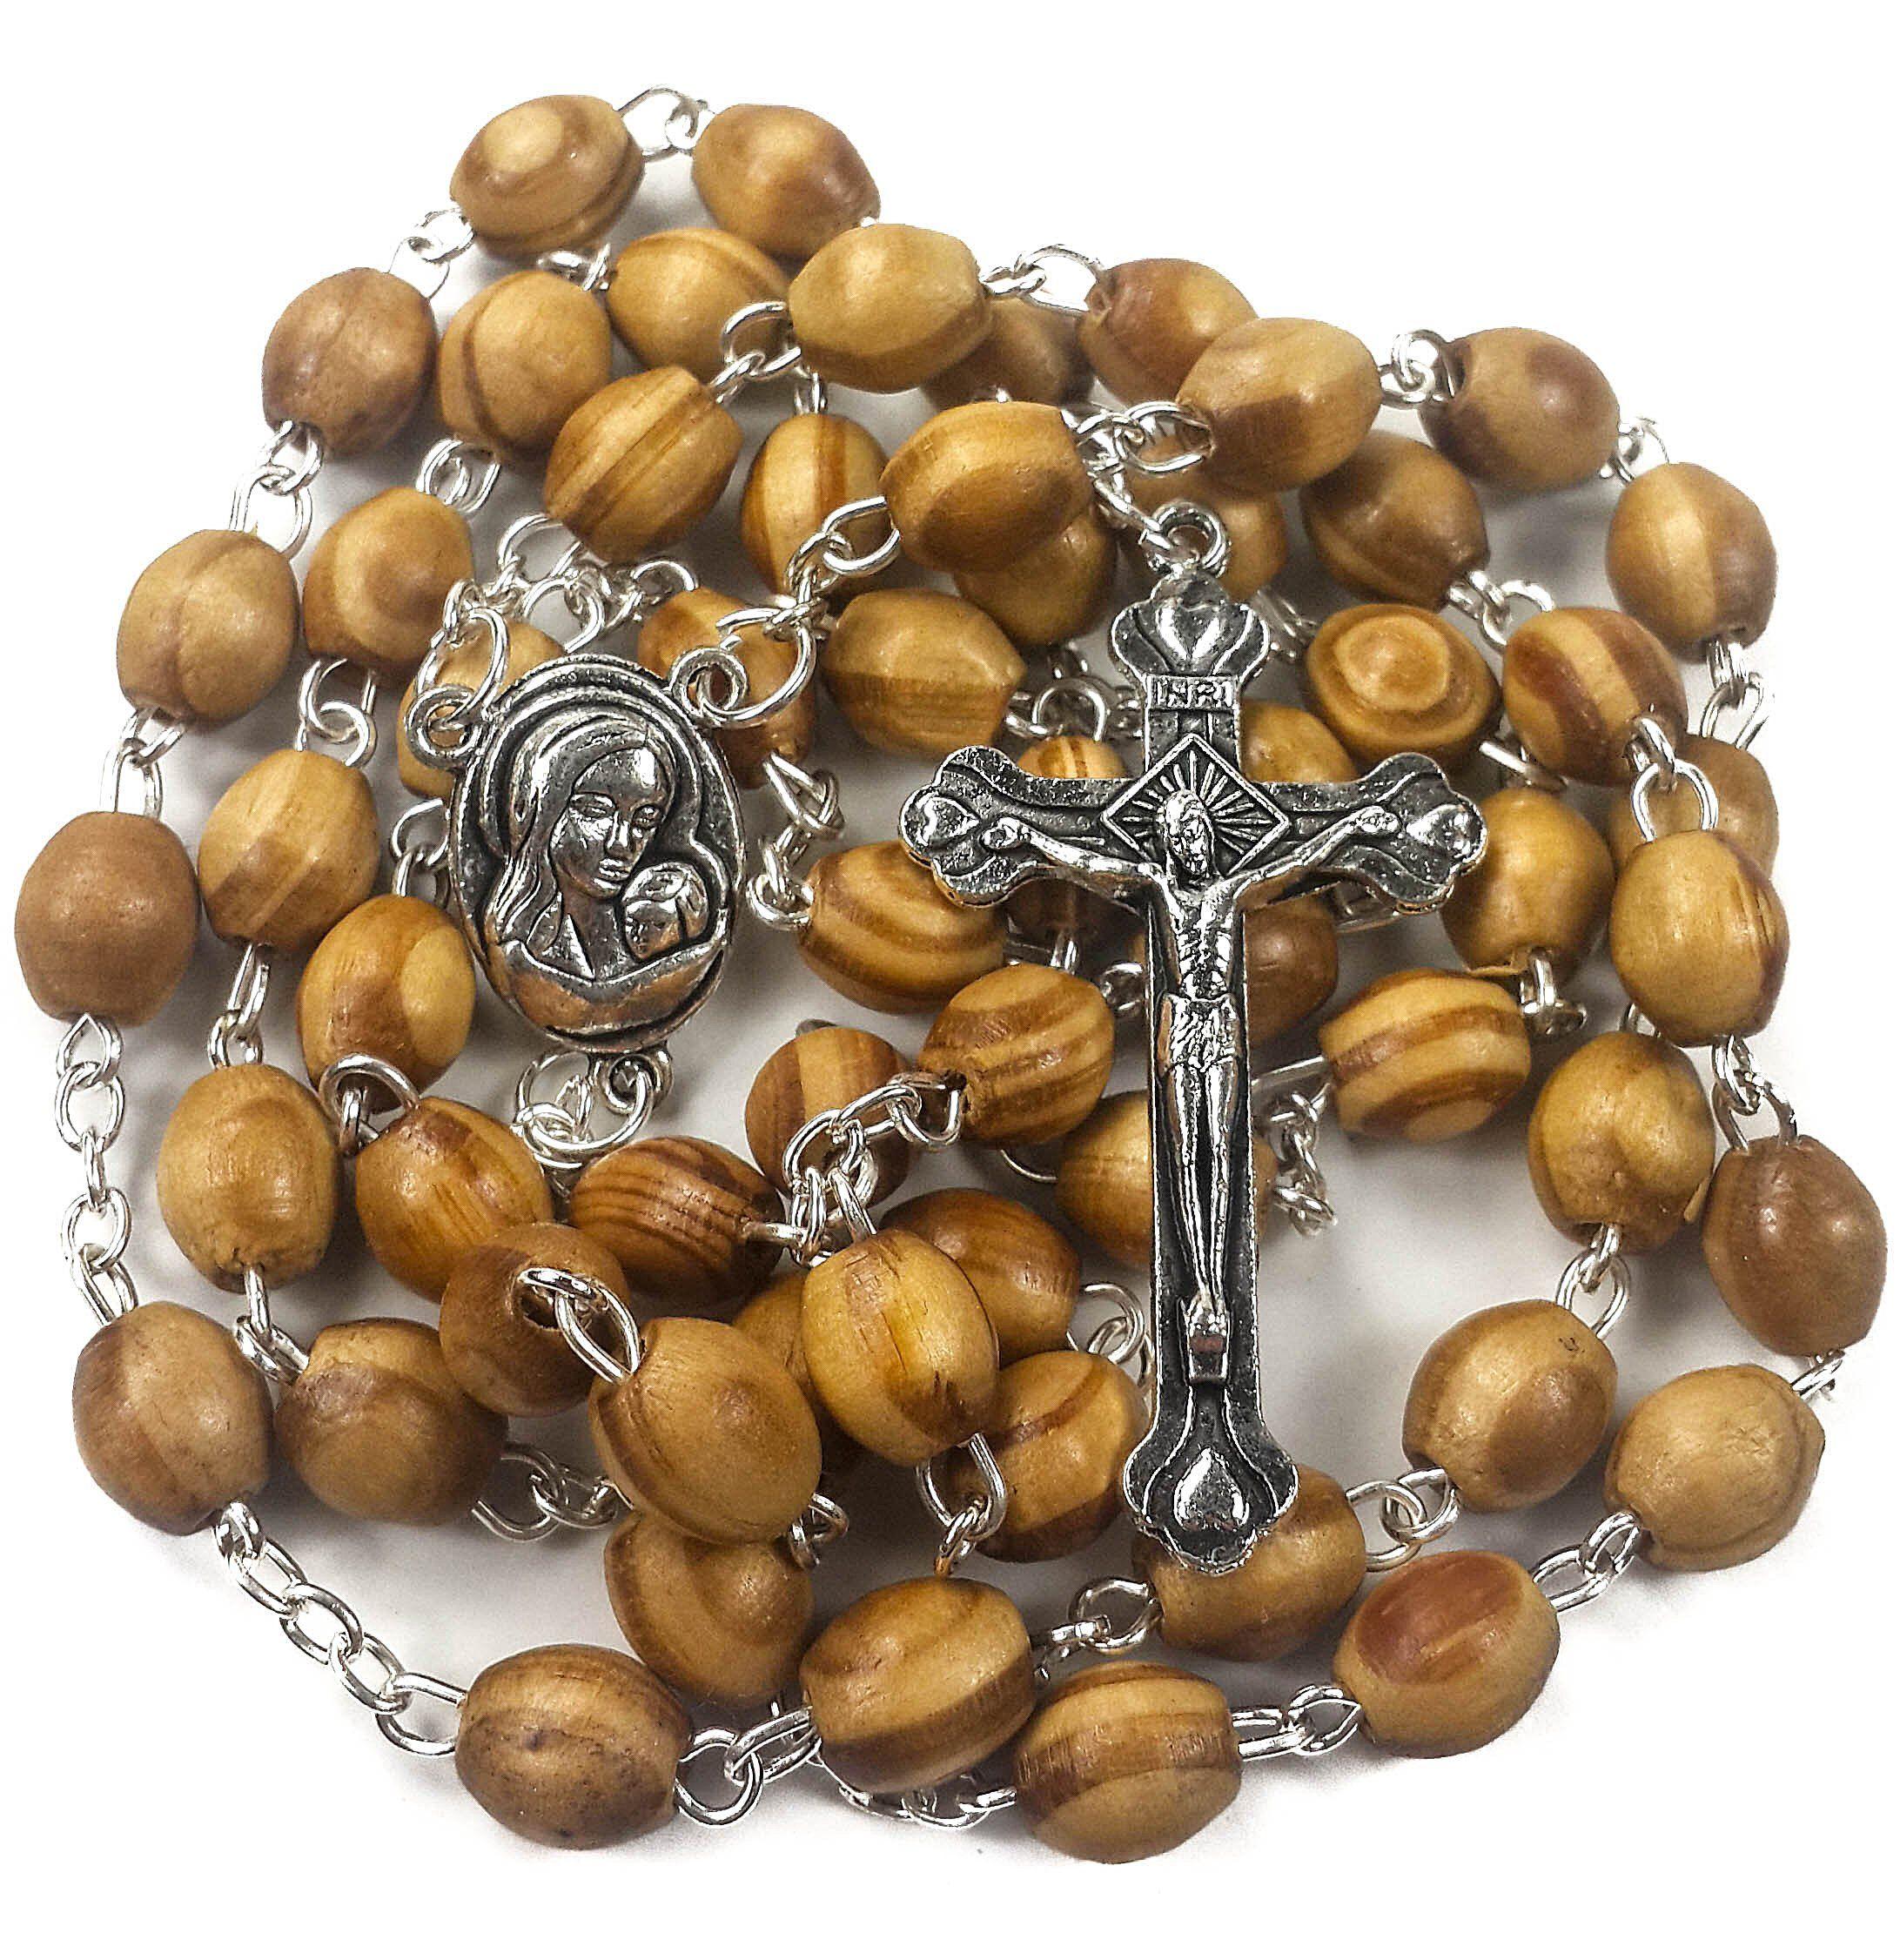 Cru Cross Logo - BLESSED CATHOLIC ROSARY NECKLACE Red Rose Scented Wood Beads ...